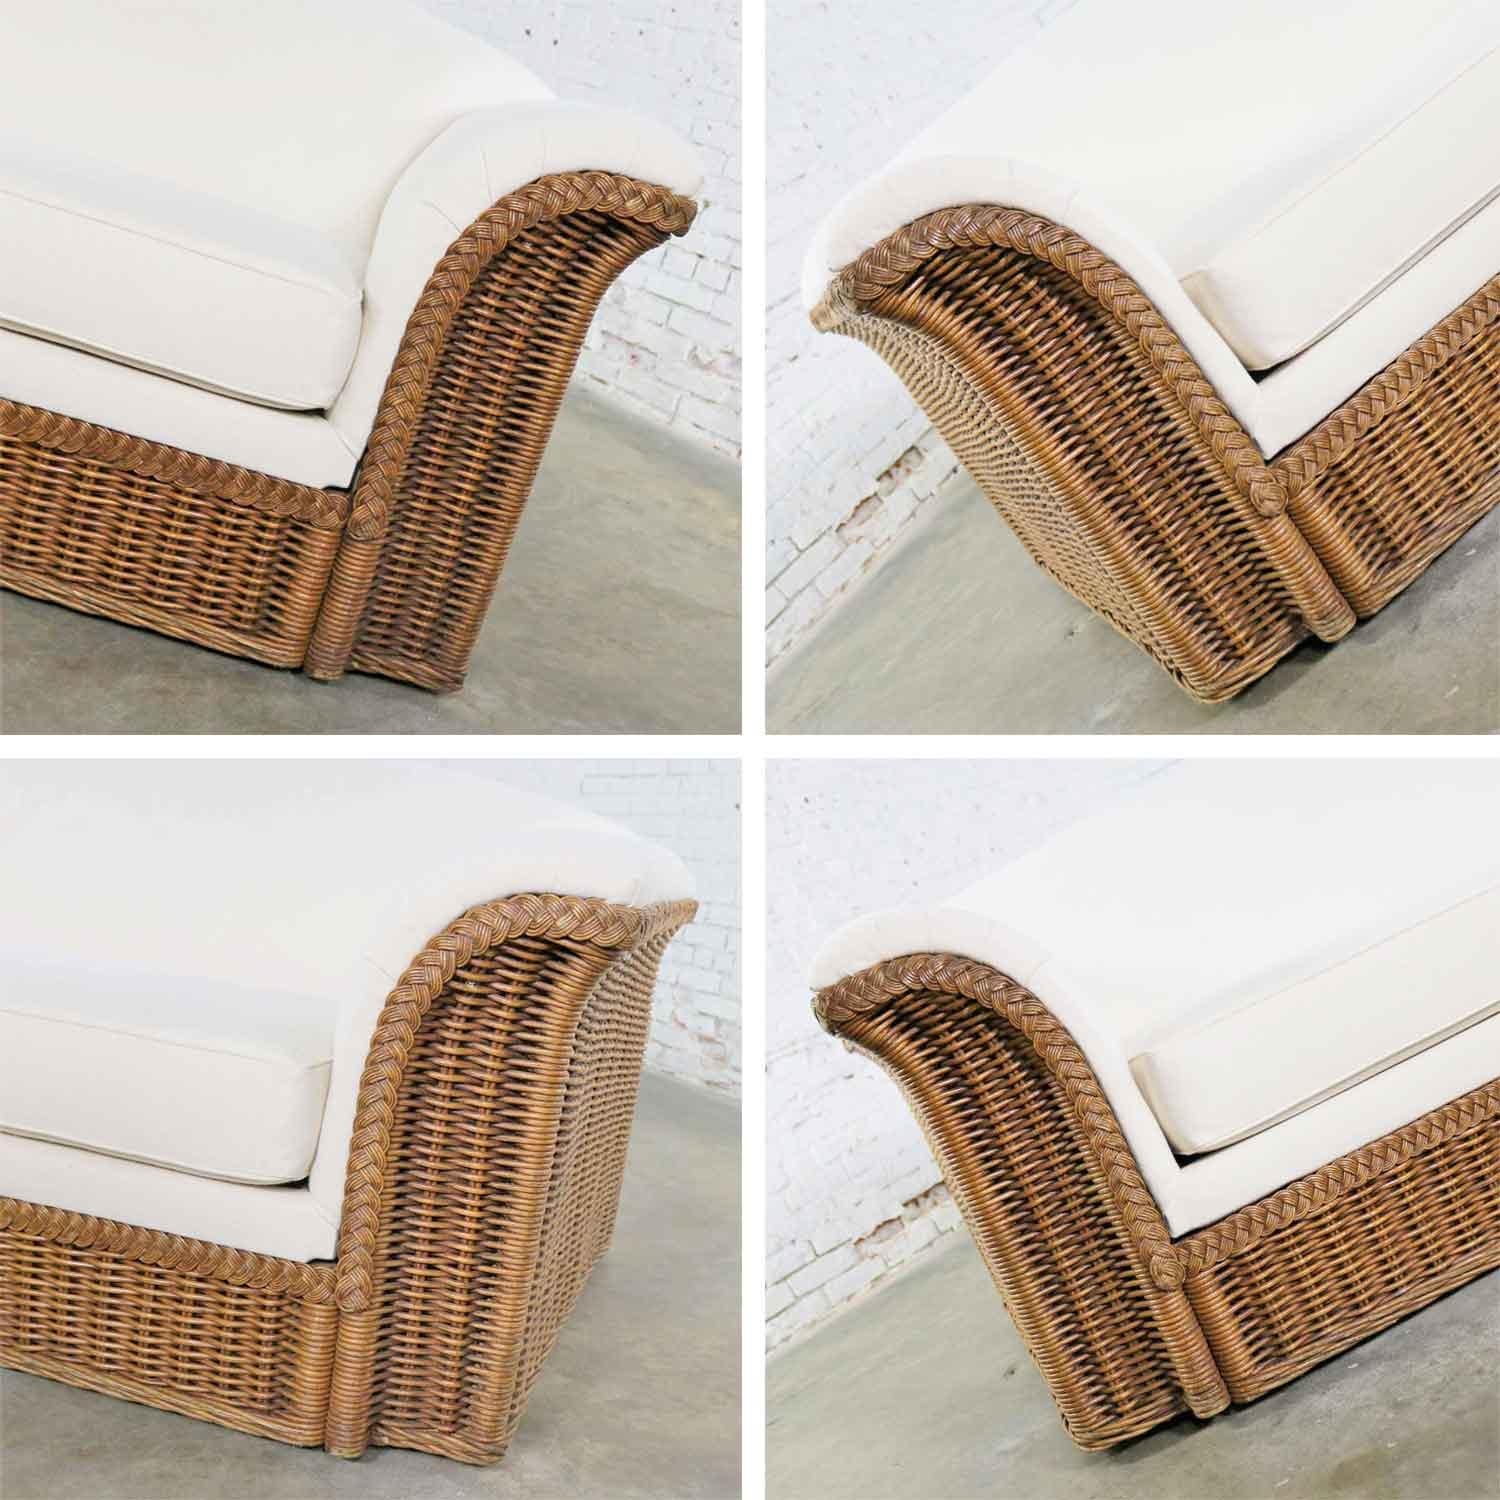 Vintage Modern Wicker Sofa Manner Michael Taylor in New White Canvas 6